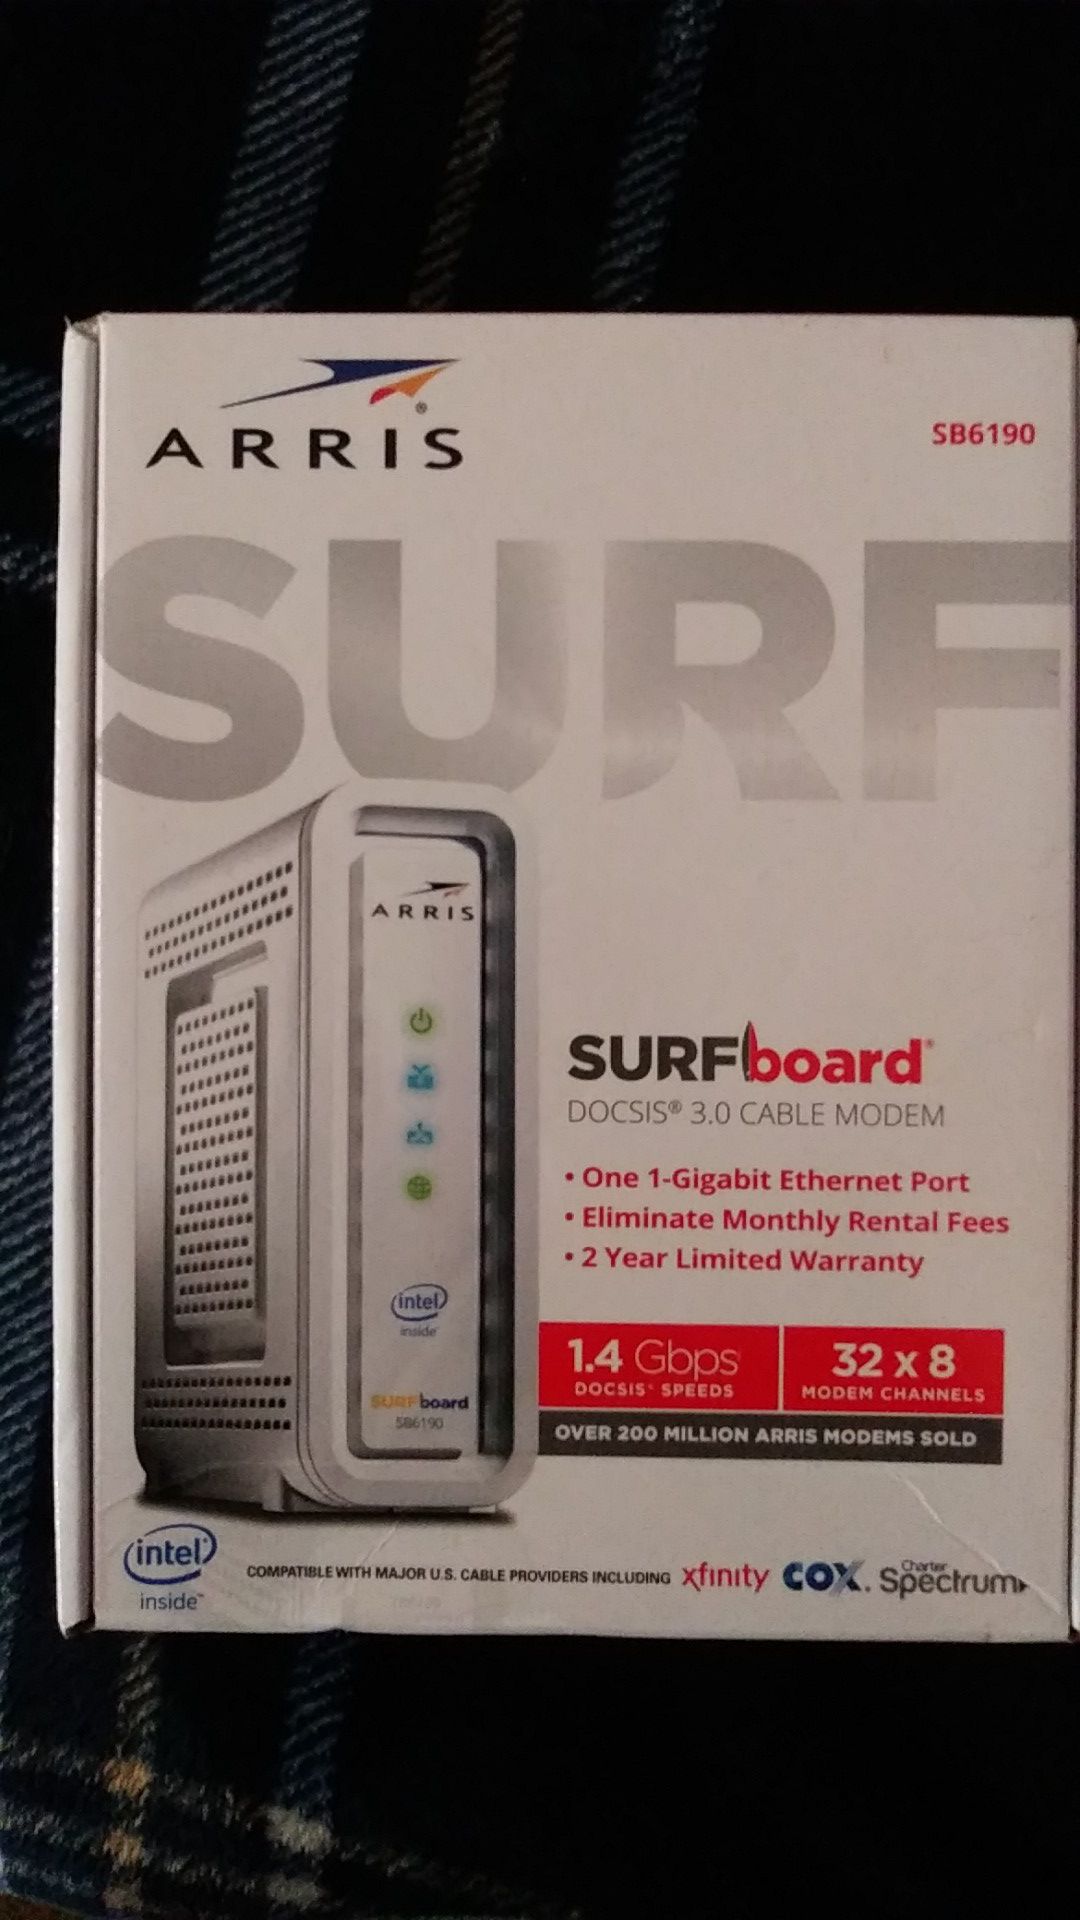 Arris Surfboard DO DID 3.0 CABLE MODEM SB6190